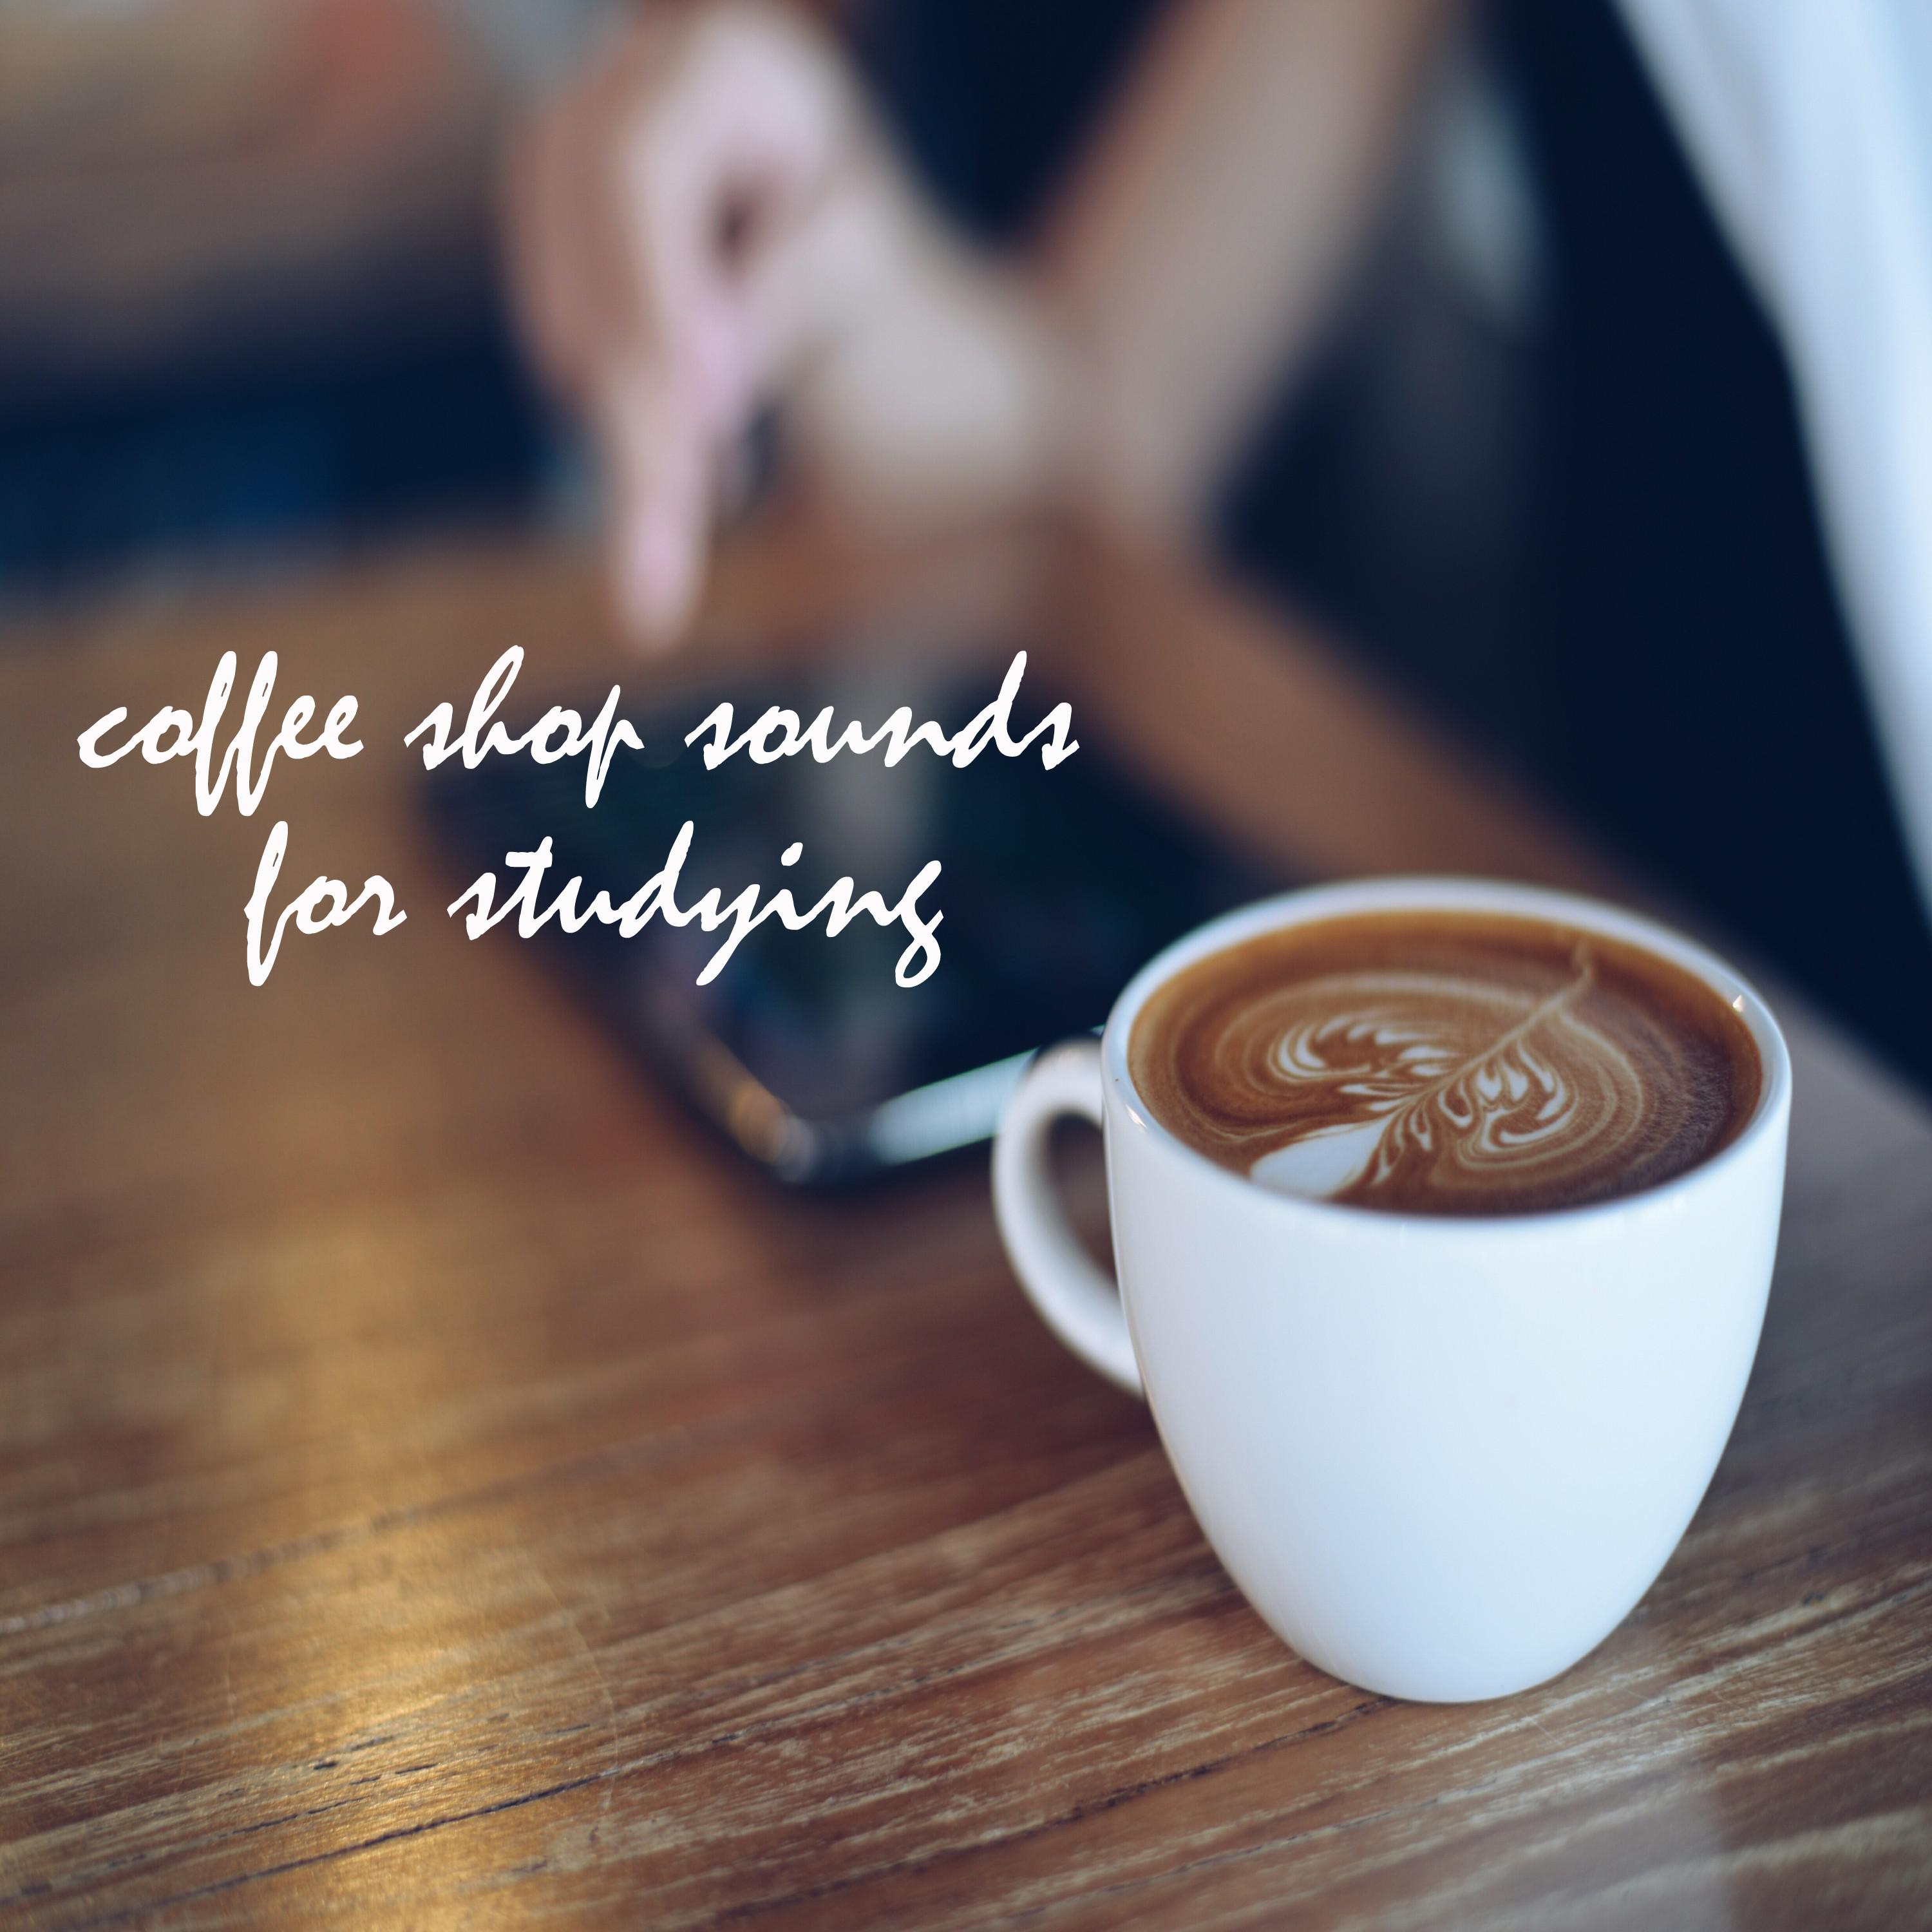 Coffee Shop Sounds for Studying and Working, Pt. 12